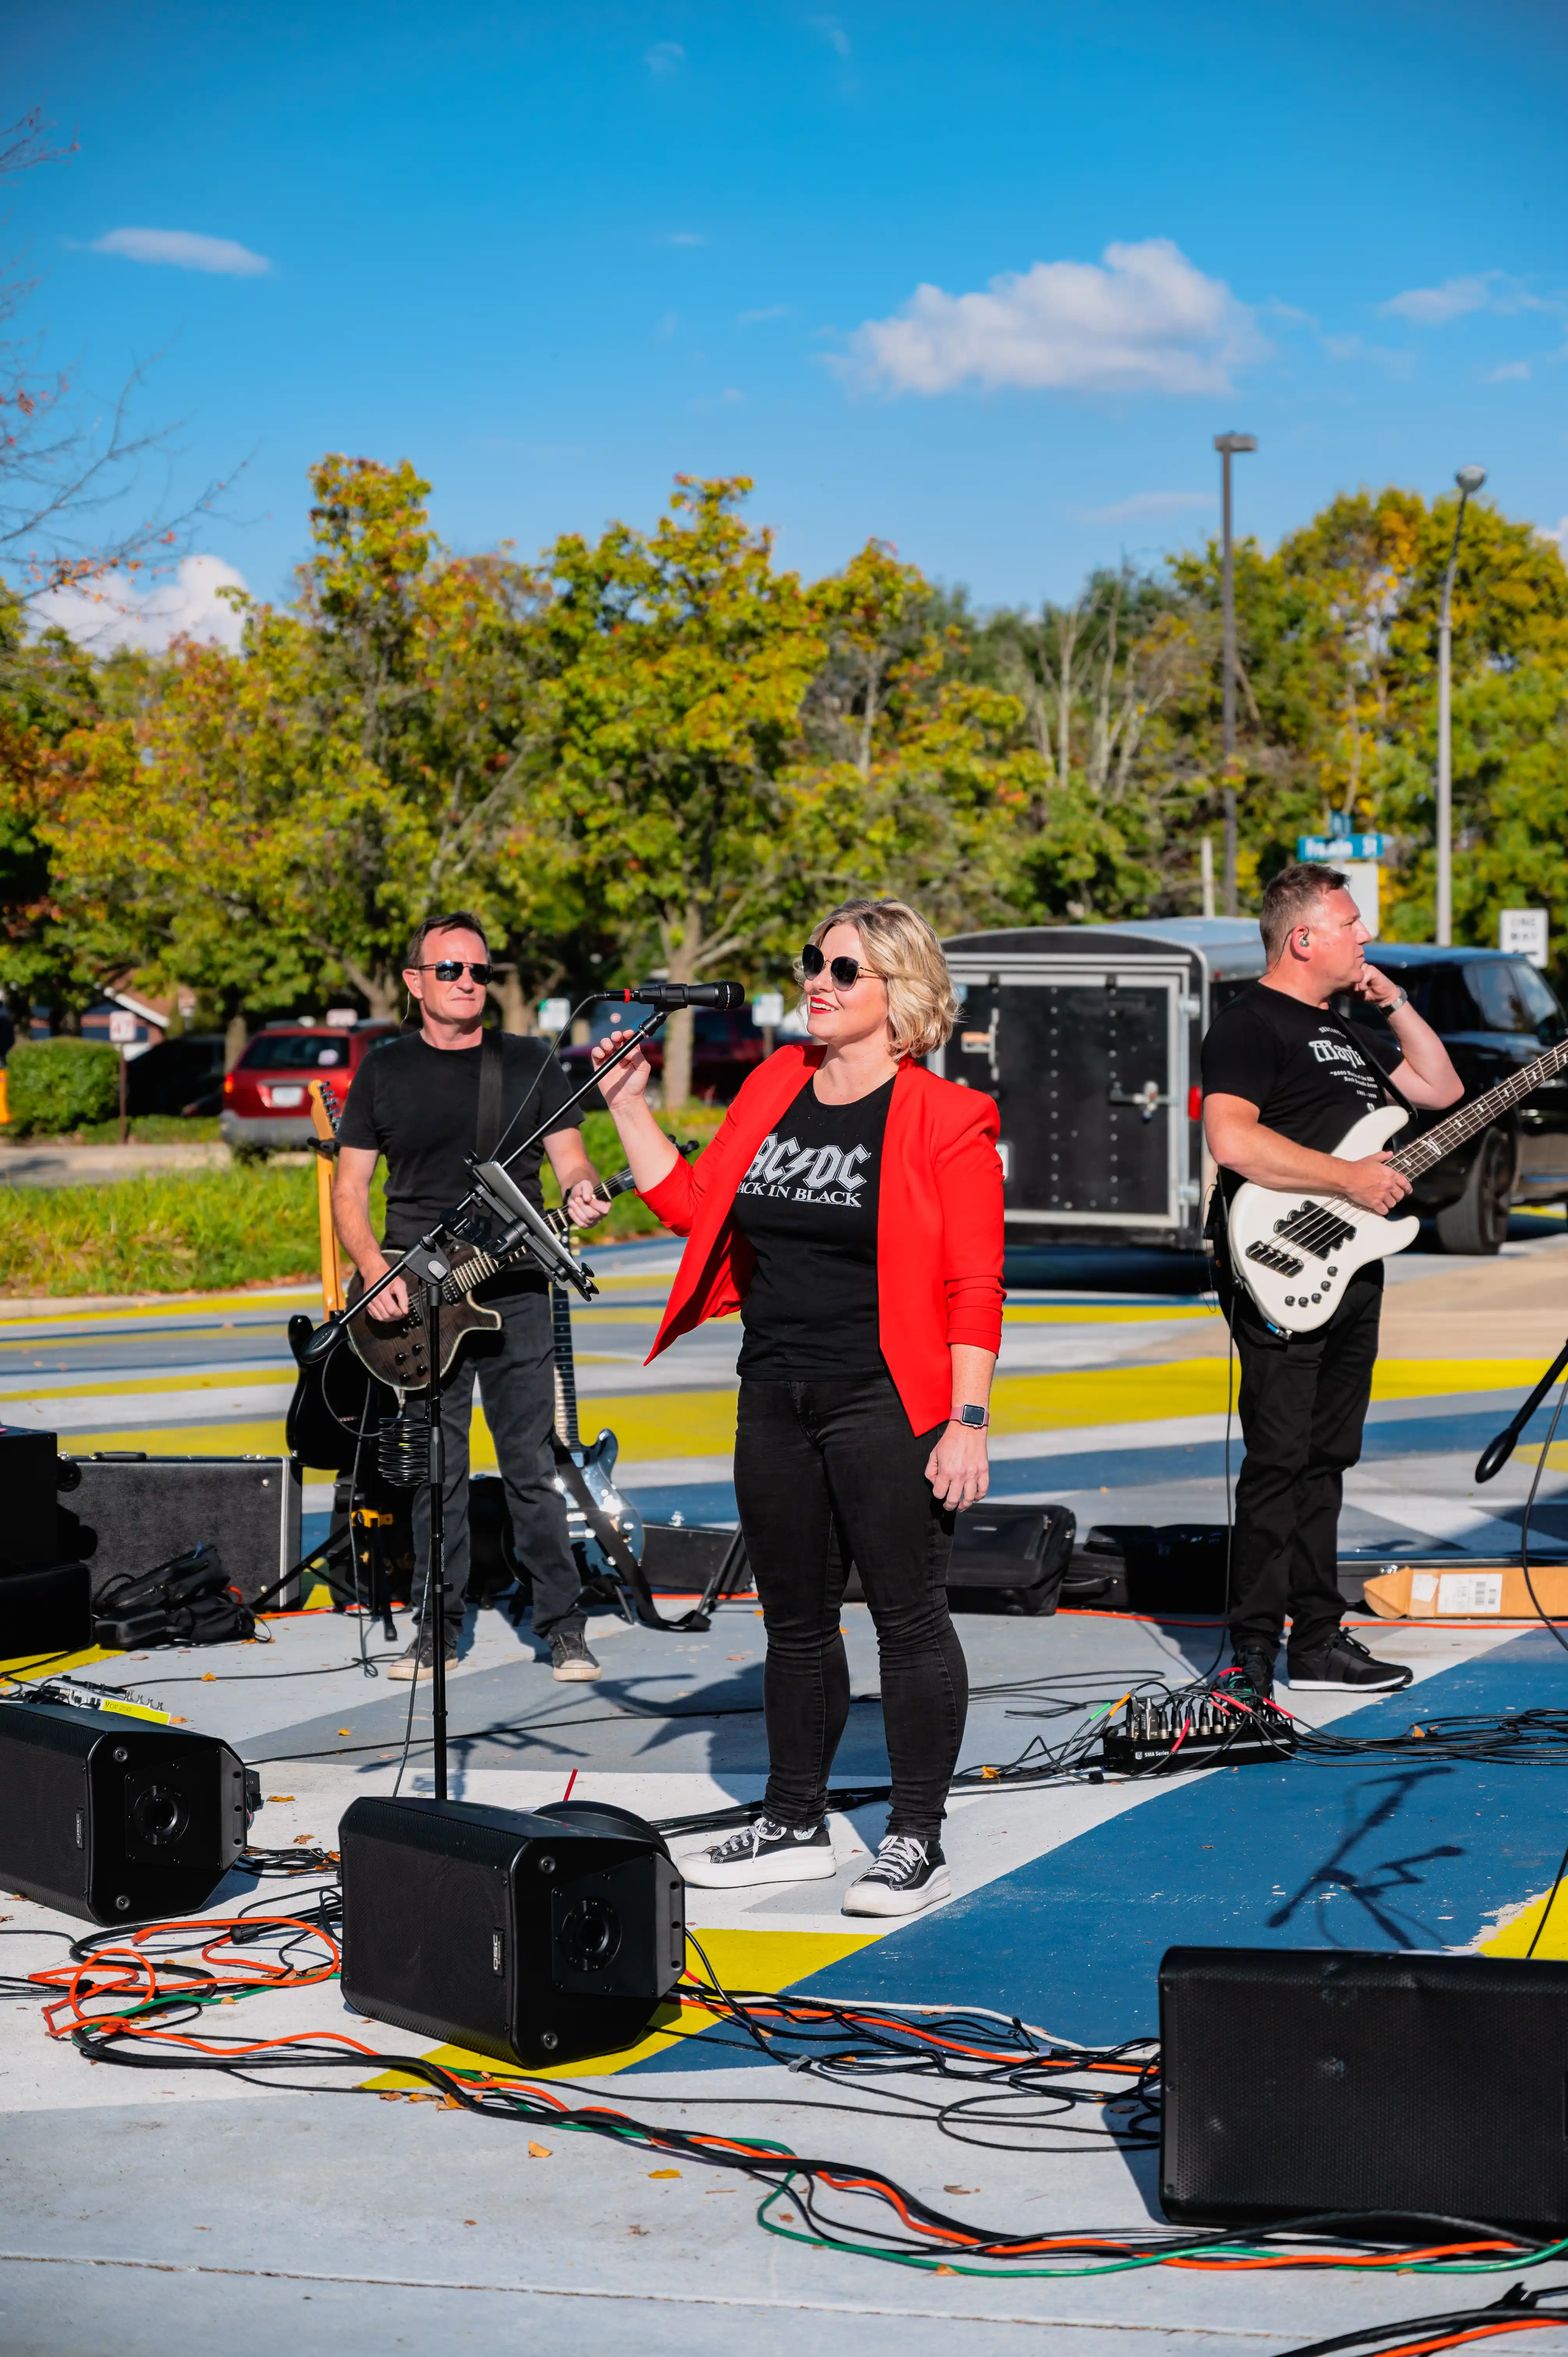 Band performing on an outdoor stage in daytime, with a female singer in front and male guitarists and bassist in the background, with scenic autumn trees and blue sky.